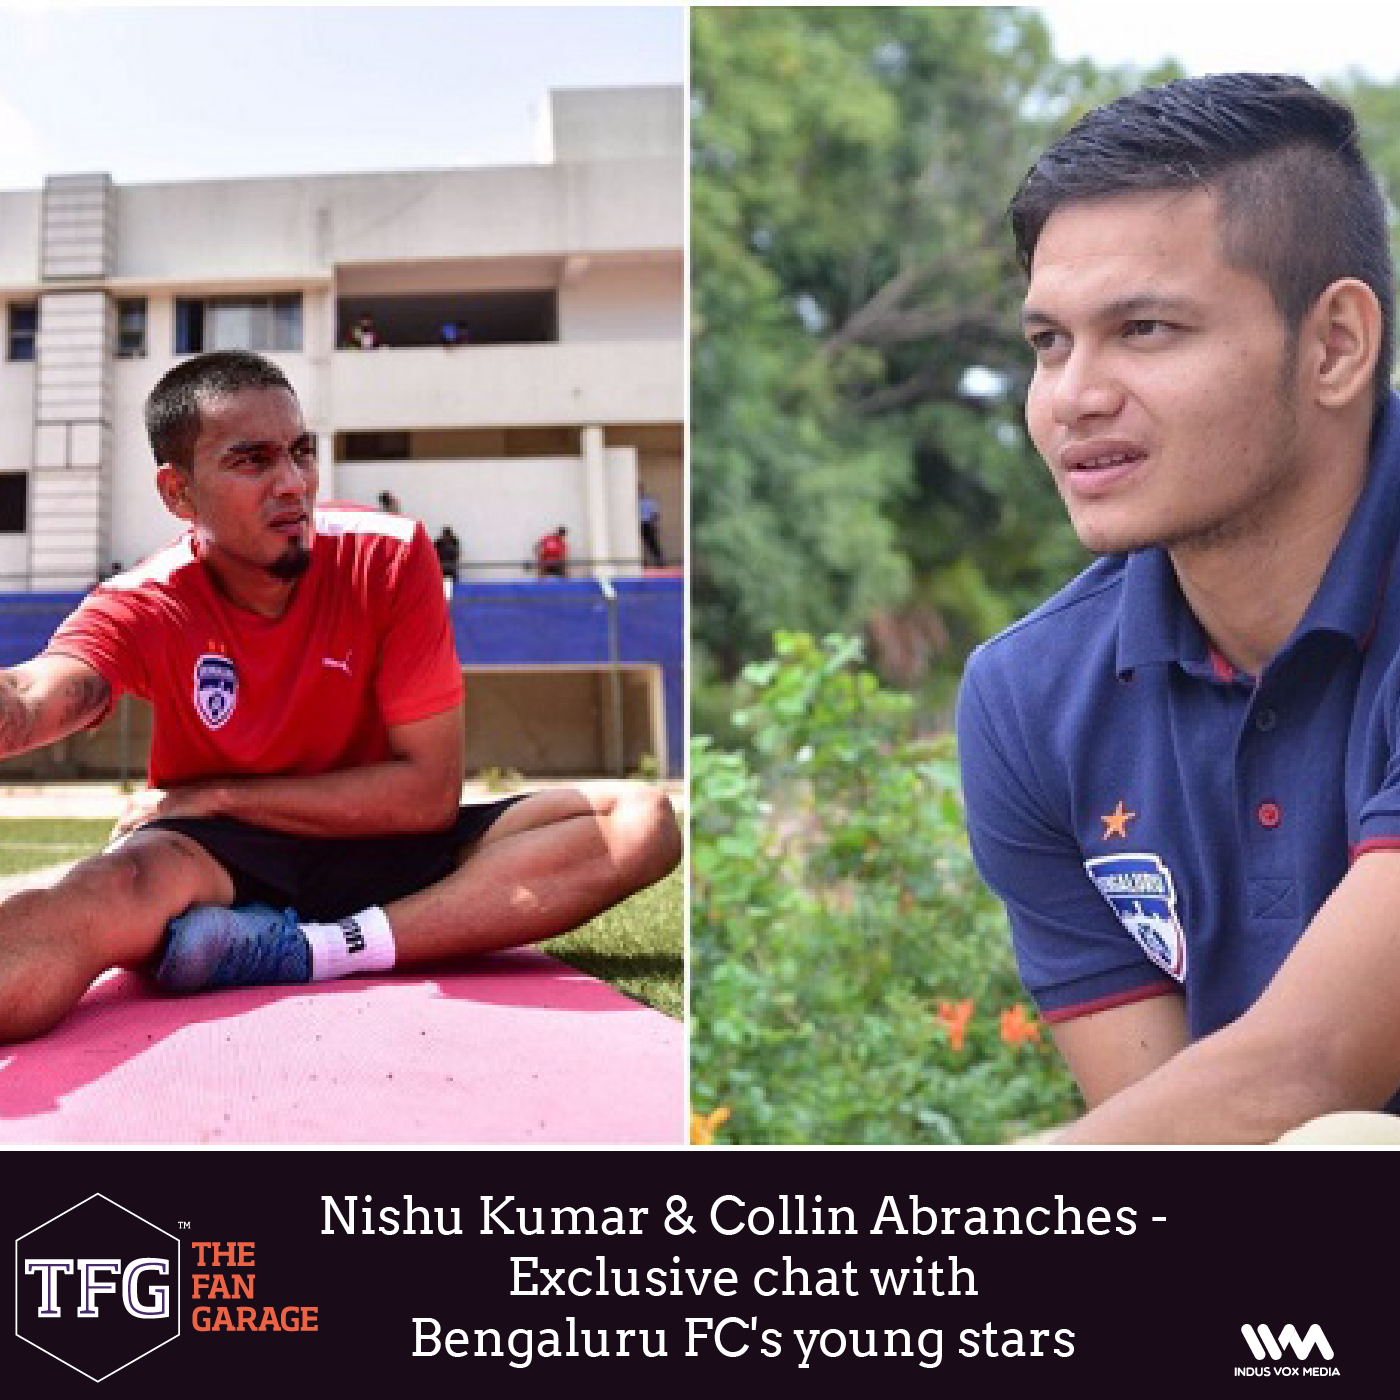 TFG interviews Ep. 030: Nishu Kumar & Collin Abranches -- Exclusive chat with Bengaluru FC's young stars